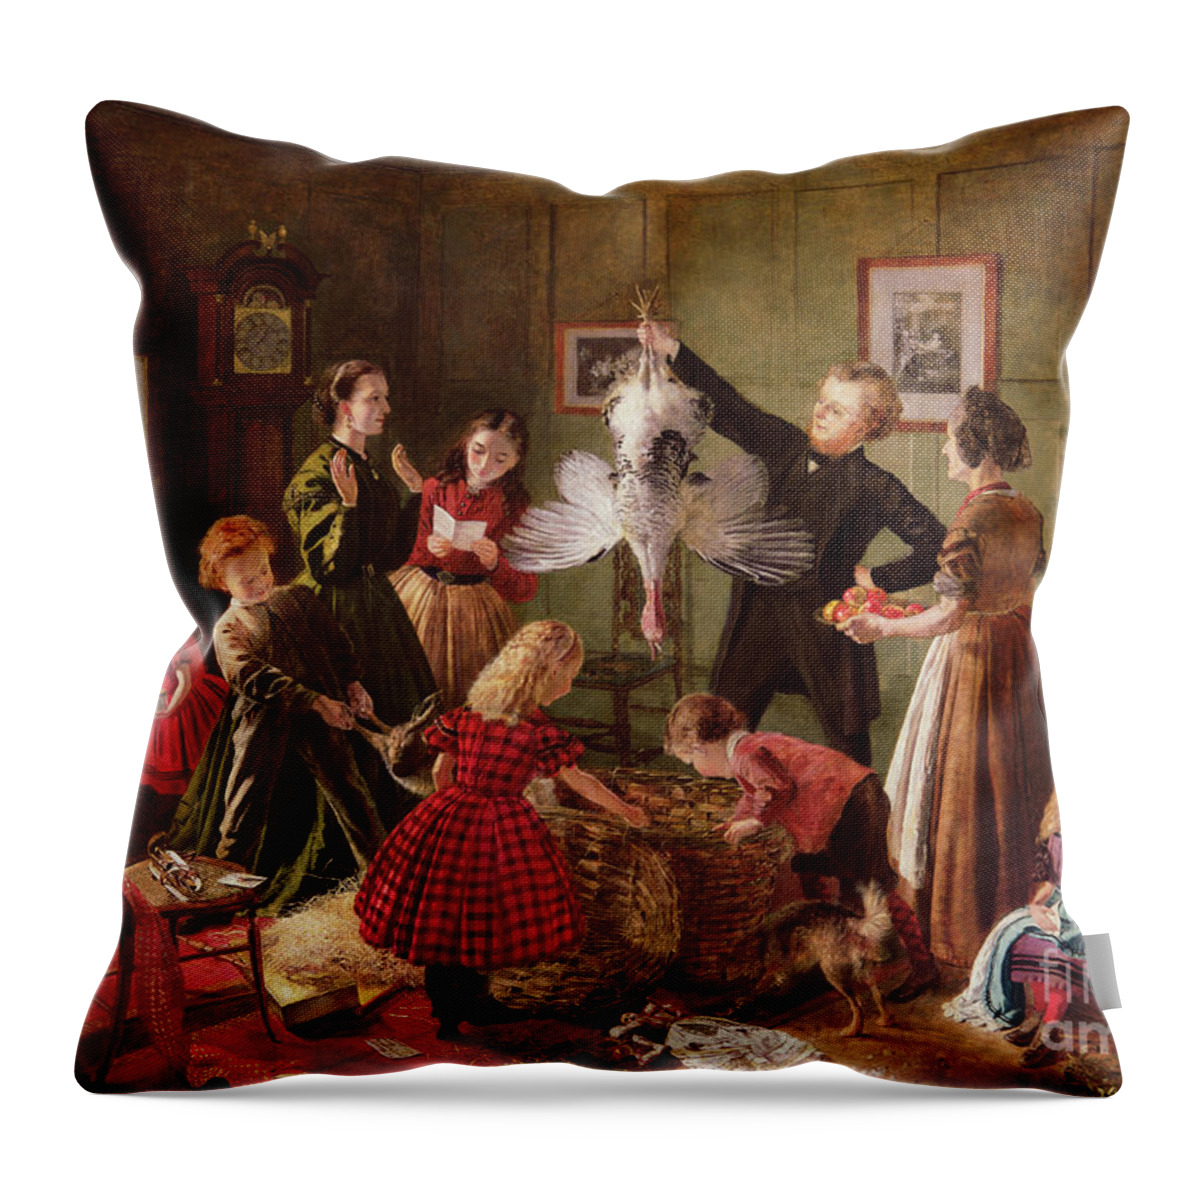 The Throw Pillow featuring the painting The Christmas Hamper by Robert Braithwaite Martineau